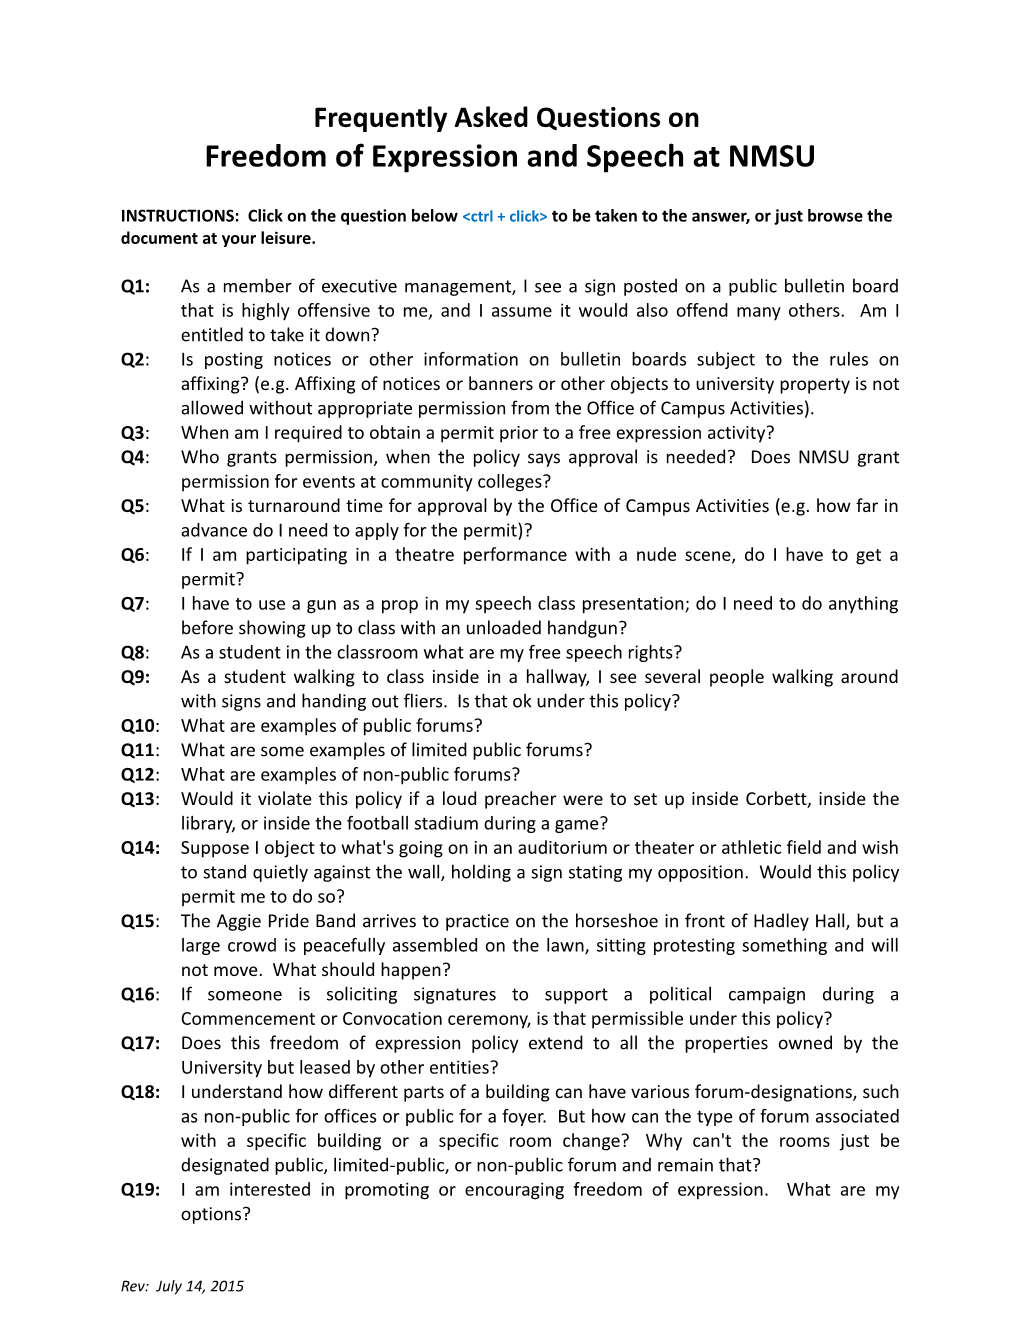 Frequently Asked Questions on Freedom of Expression and Speech at NMSU